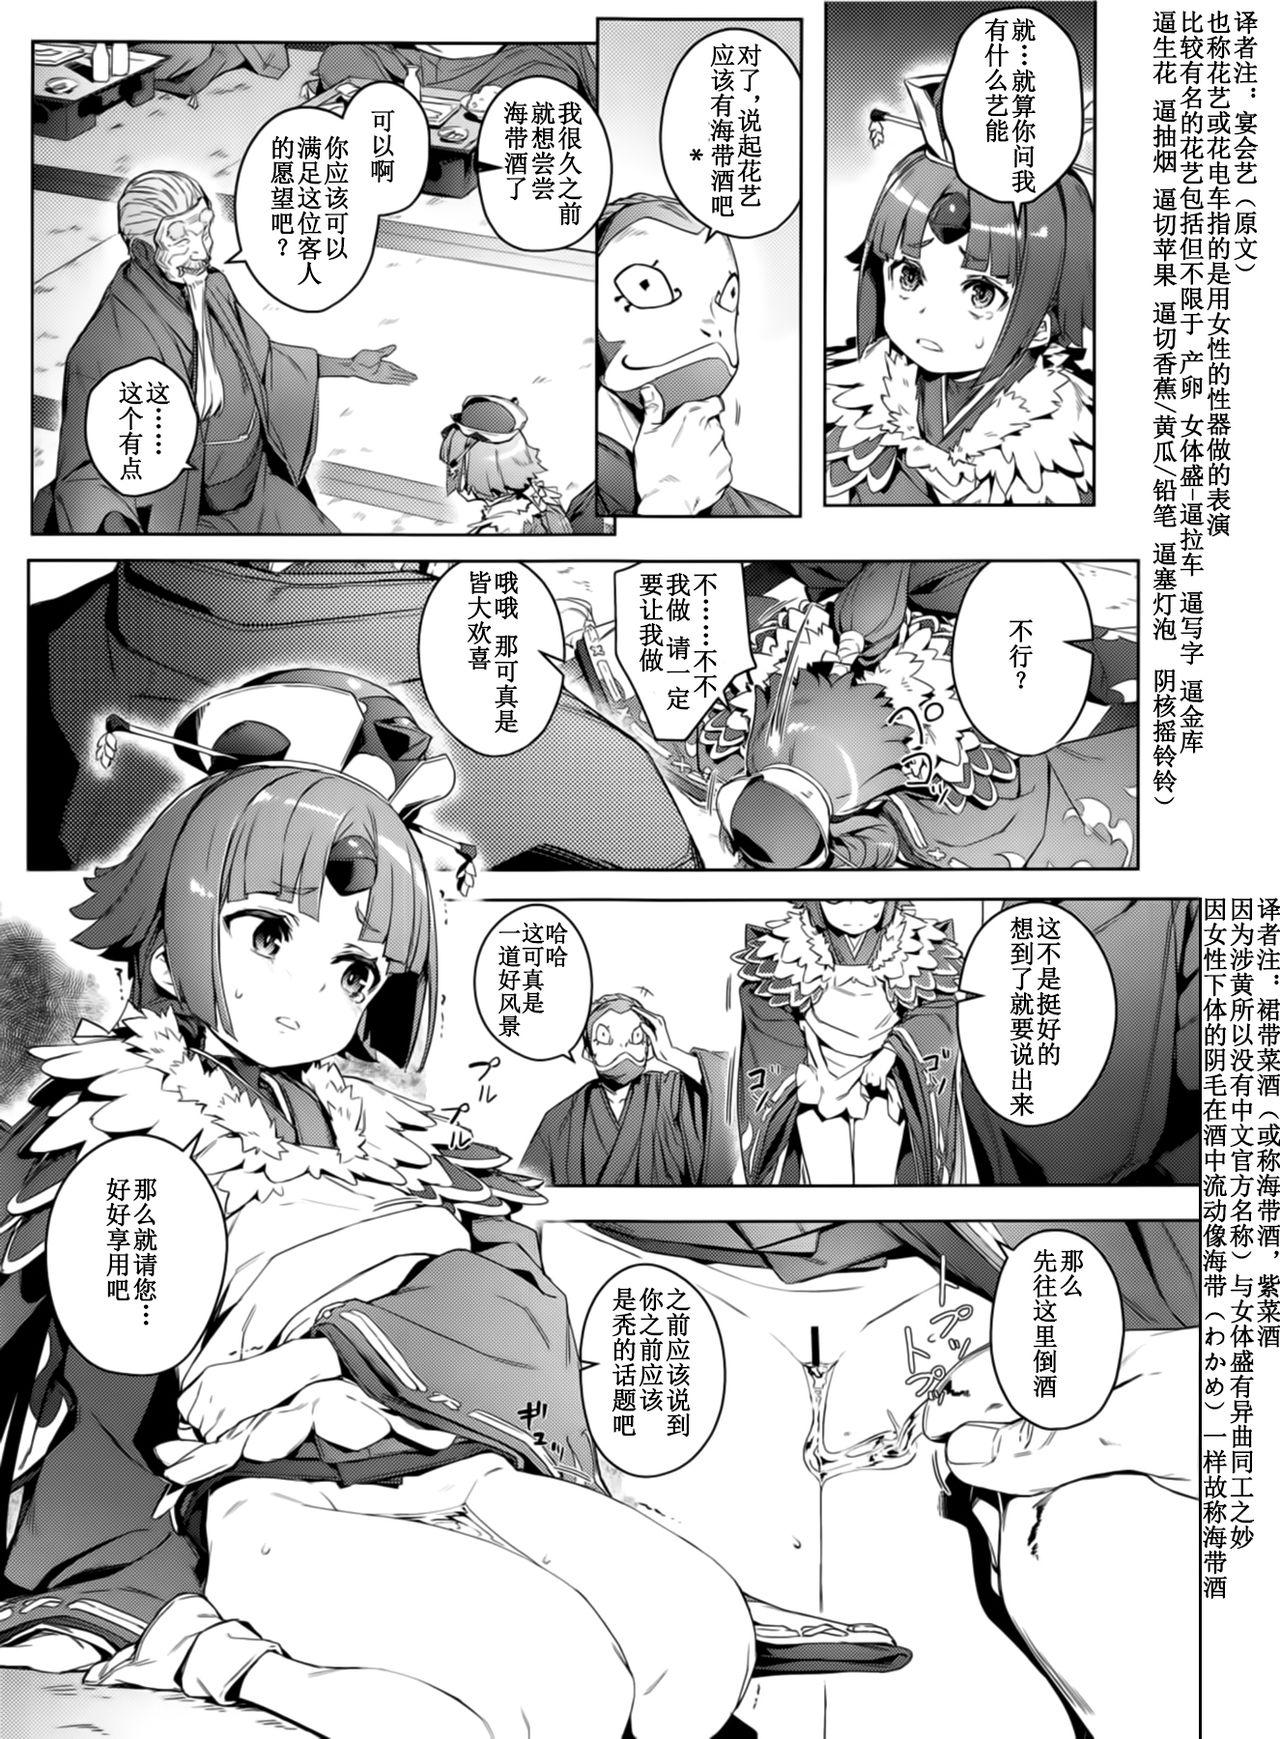 Fucked Suzume no Namida - Fate grand order Stepbrother - Page 7